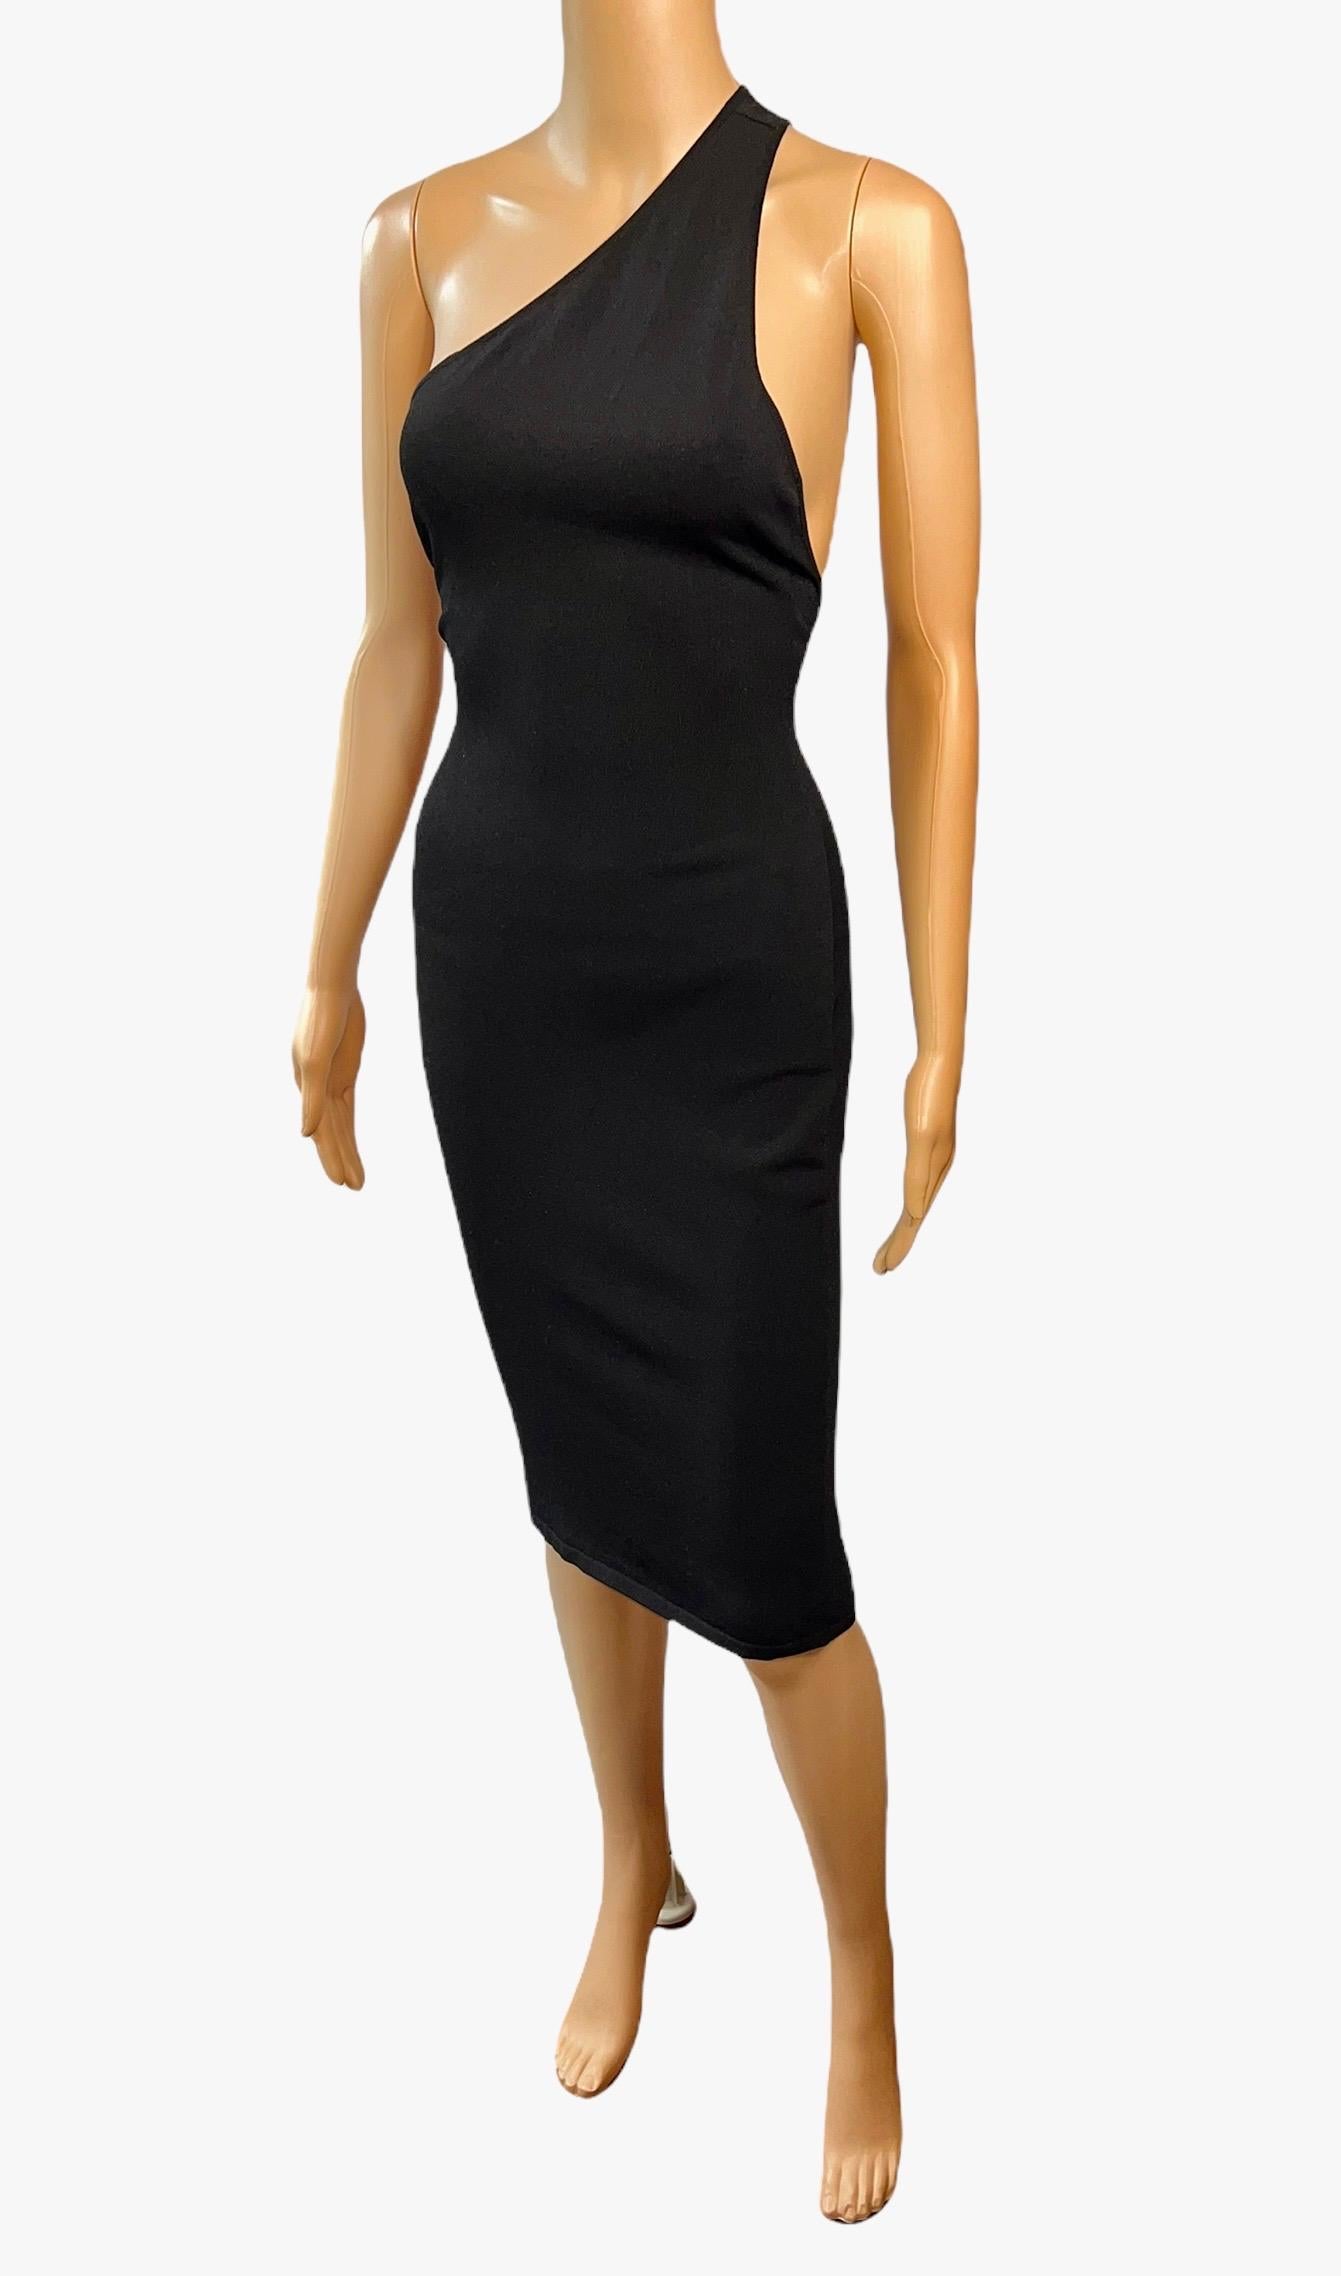 Tom Ford for Gucci S/S 2000 Cutout Bodycon Knit Black Dress Size M

